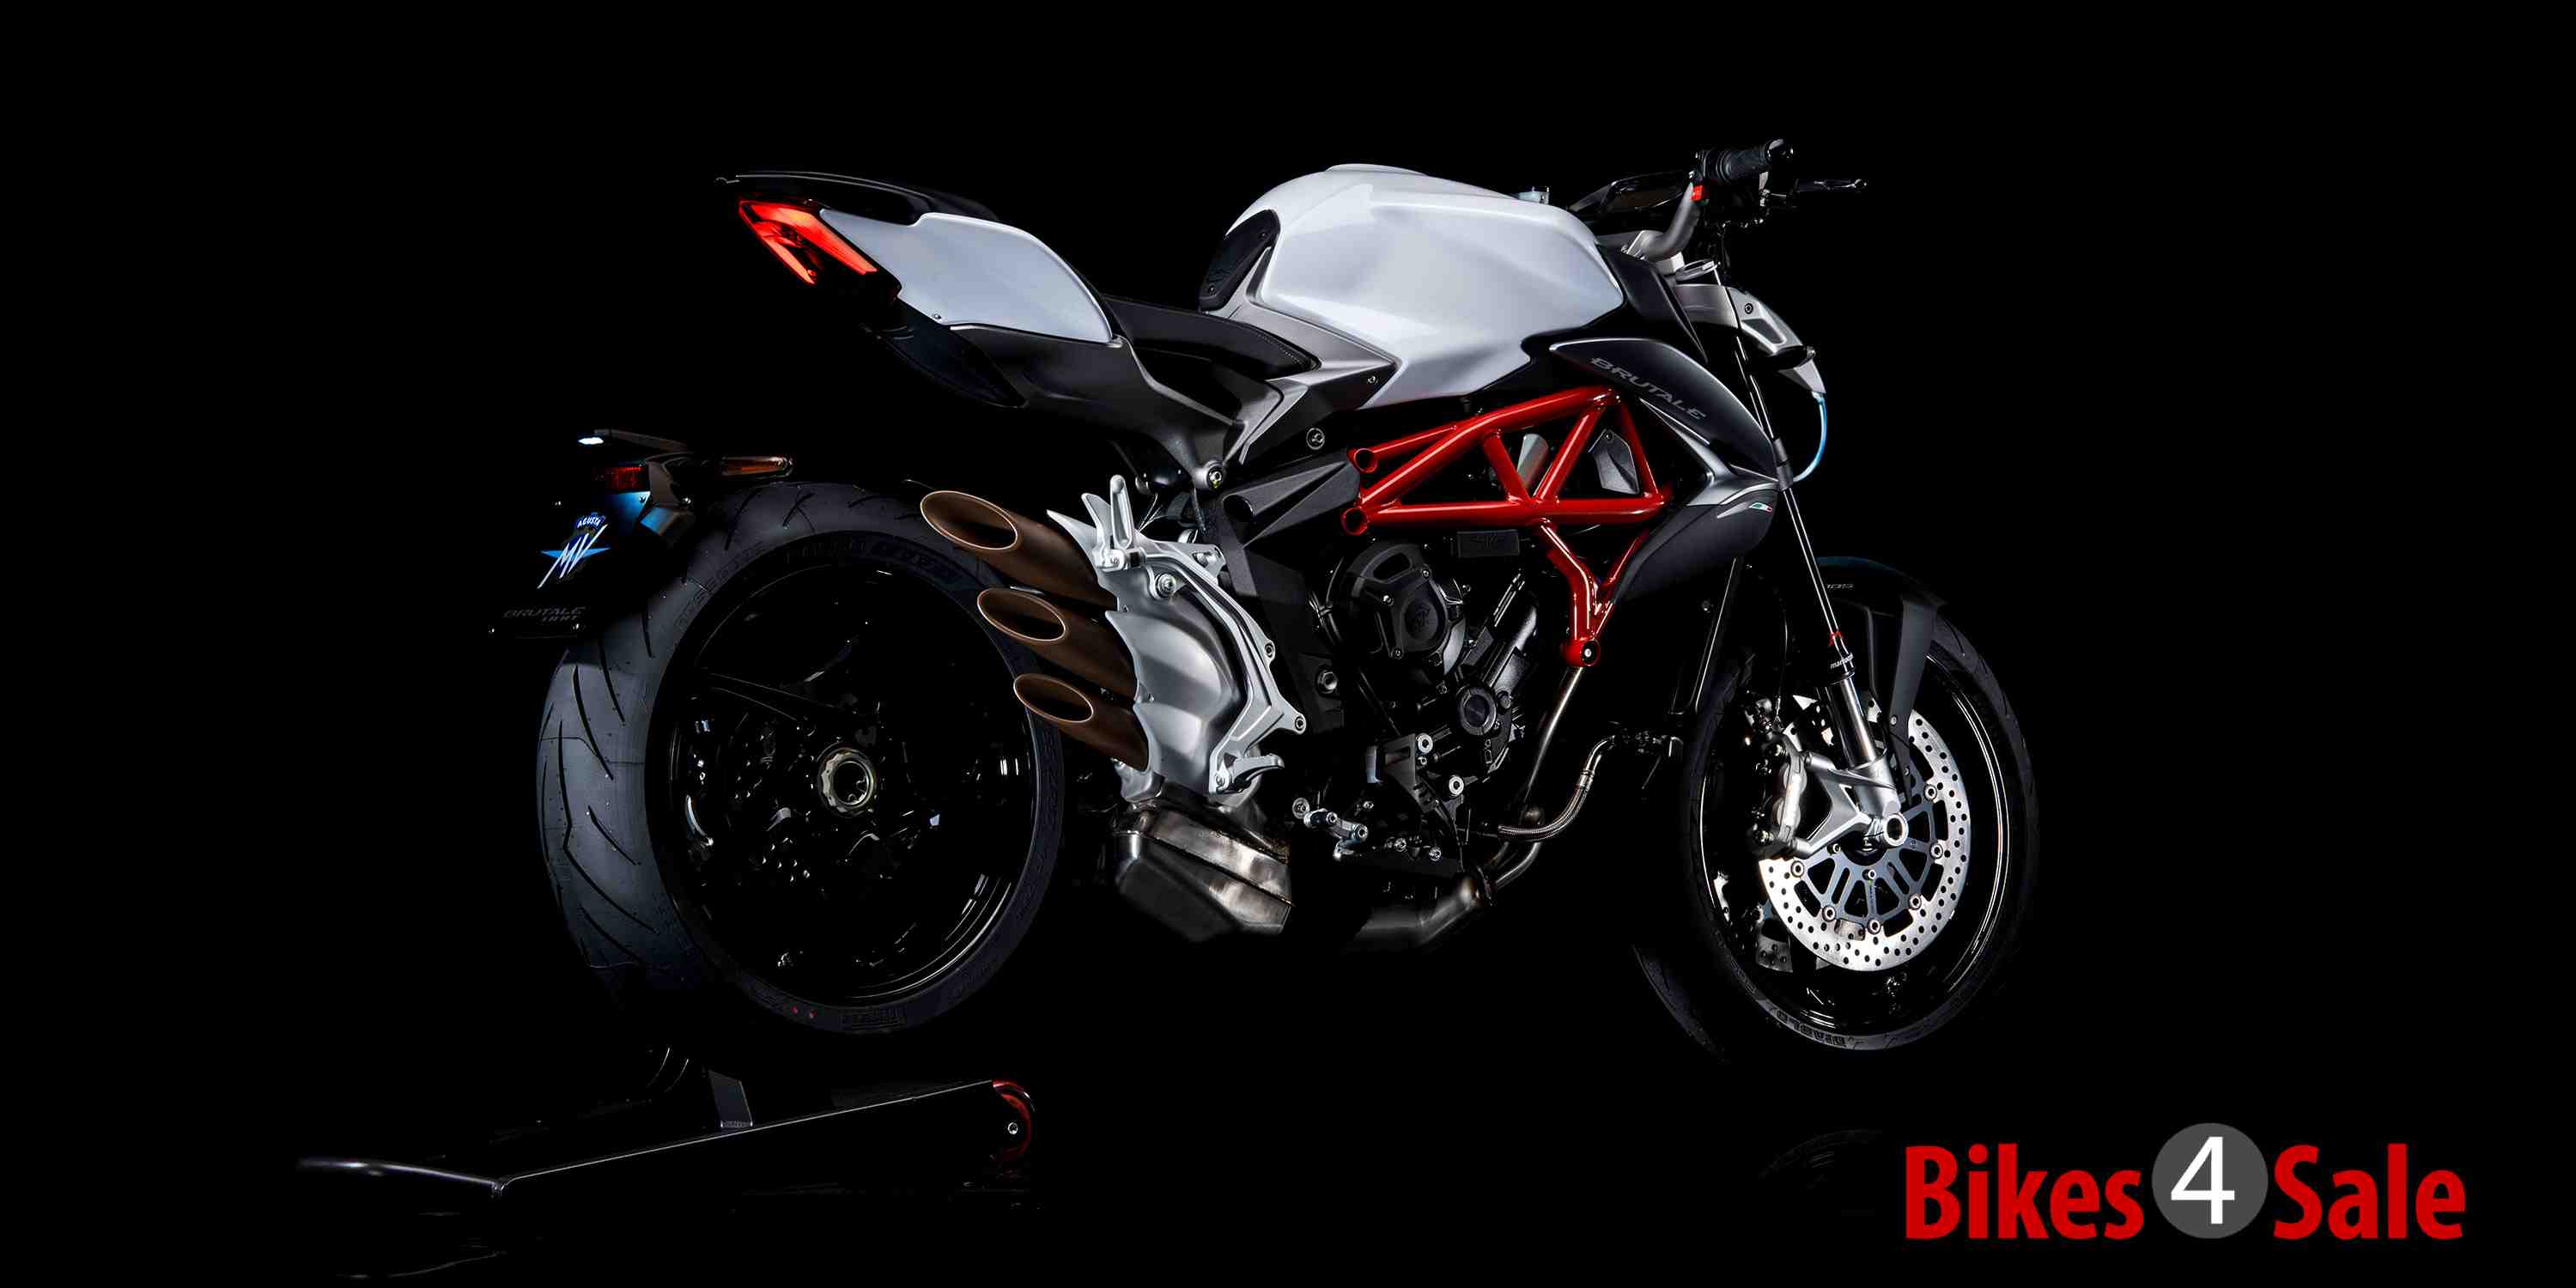 MV Agusta Brutale 800 - 2017 Brutale 800 with iconic slashed 3-exhaust pipes